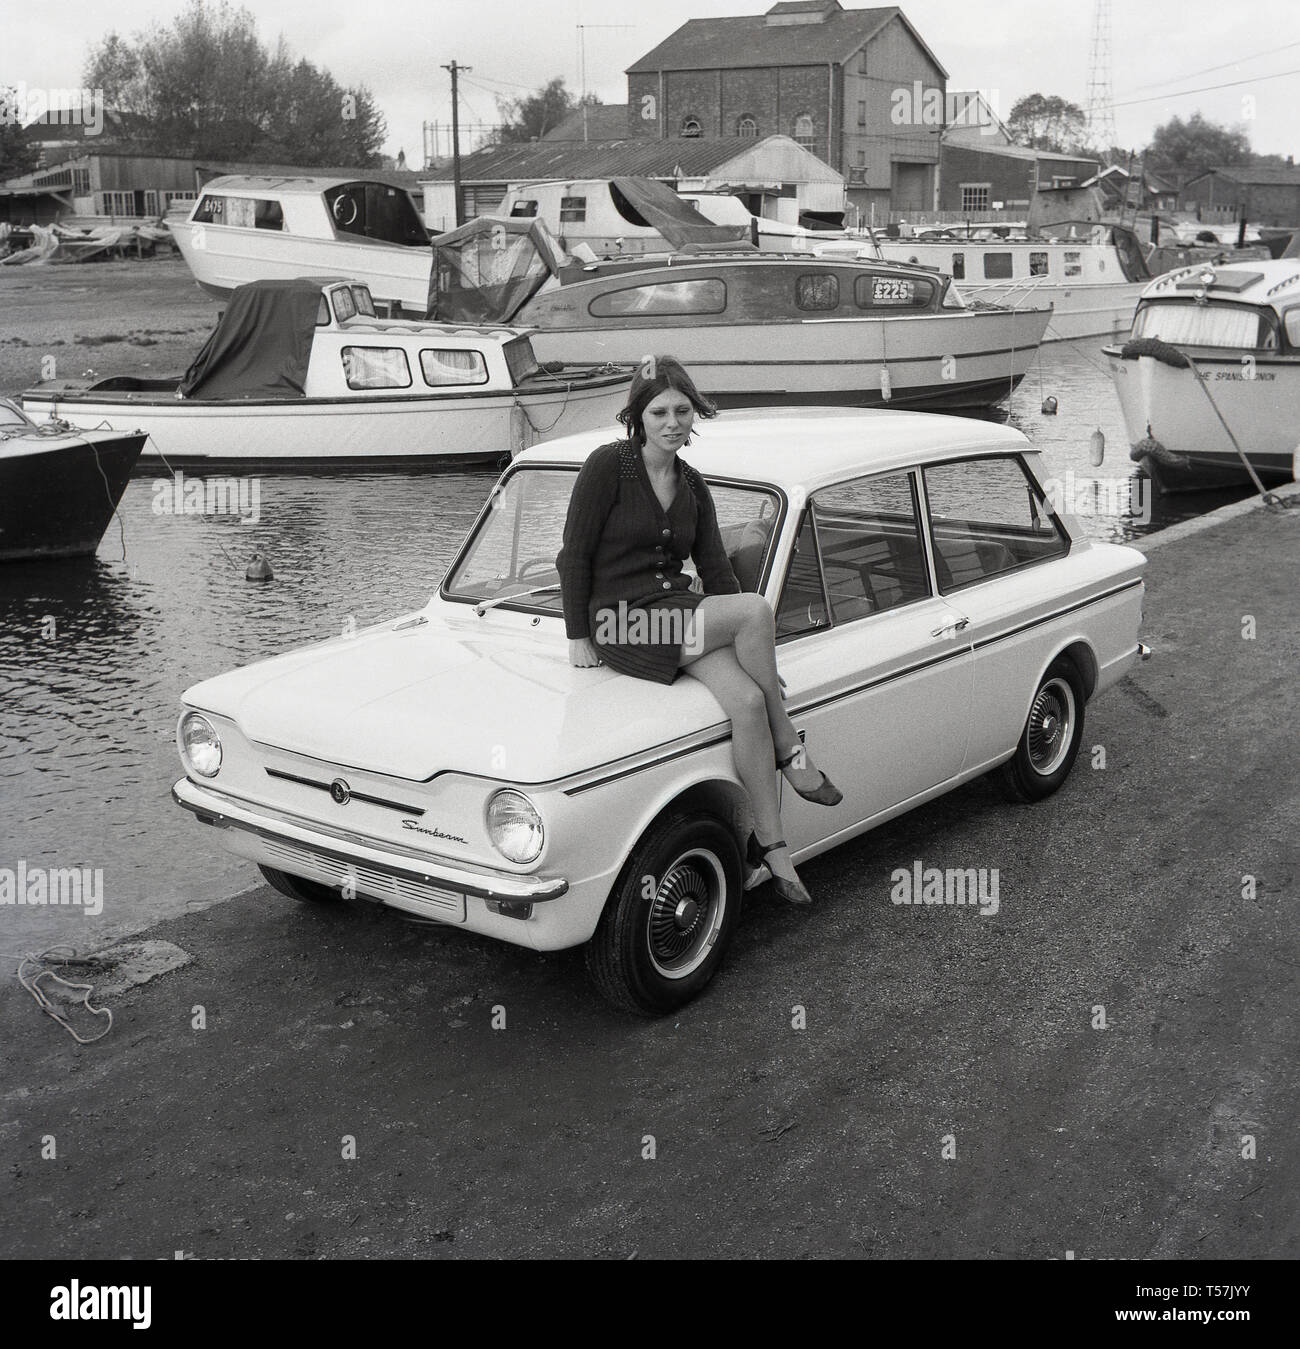 1967, historical, outside at a boatyard, we see a young lady wearing a woollen cardigan and skirt sitting or posing in the boot of a Sunbeam Sport motorcar,  the sports version of the famous small car, the HIllman Imp. The engine was at the rear and so the boot was at the front. The Hillman Imp was a rear-engined small car made by Rootes Group and its successor Chrysler Europe from 1963 until 1976. It was the competitor in the small car category to the British Leylands Mini. Stock Photo